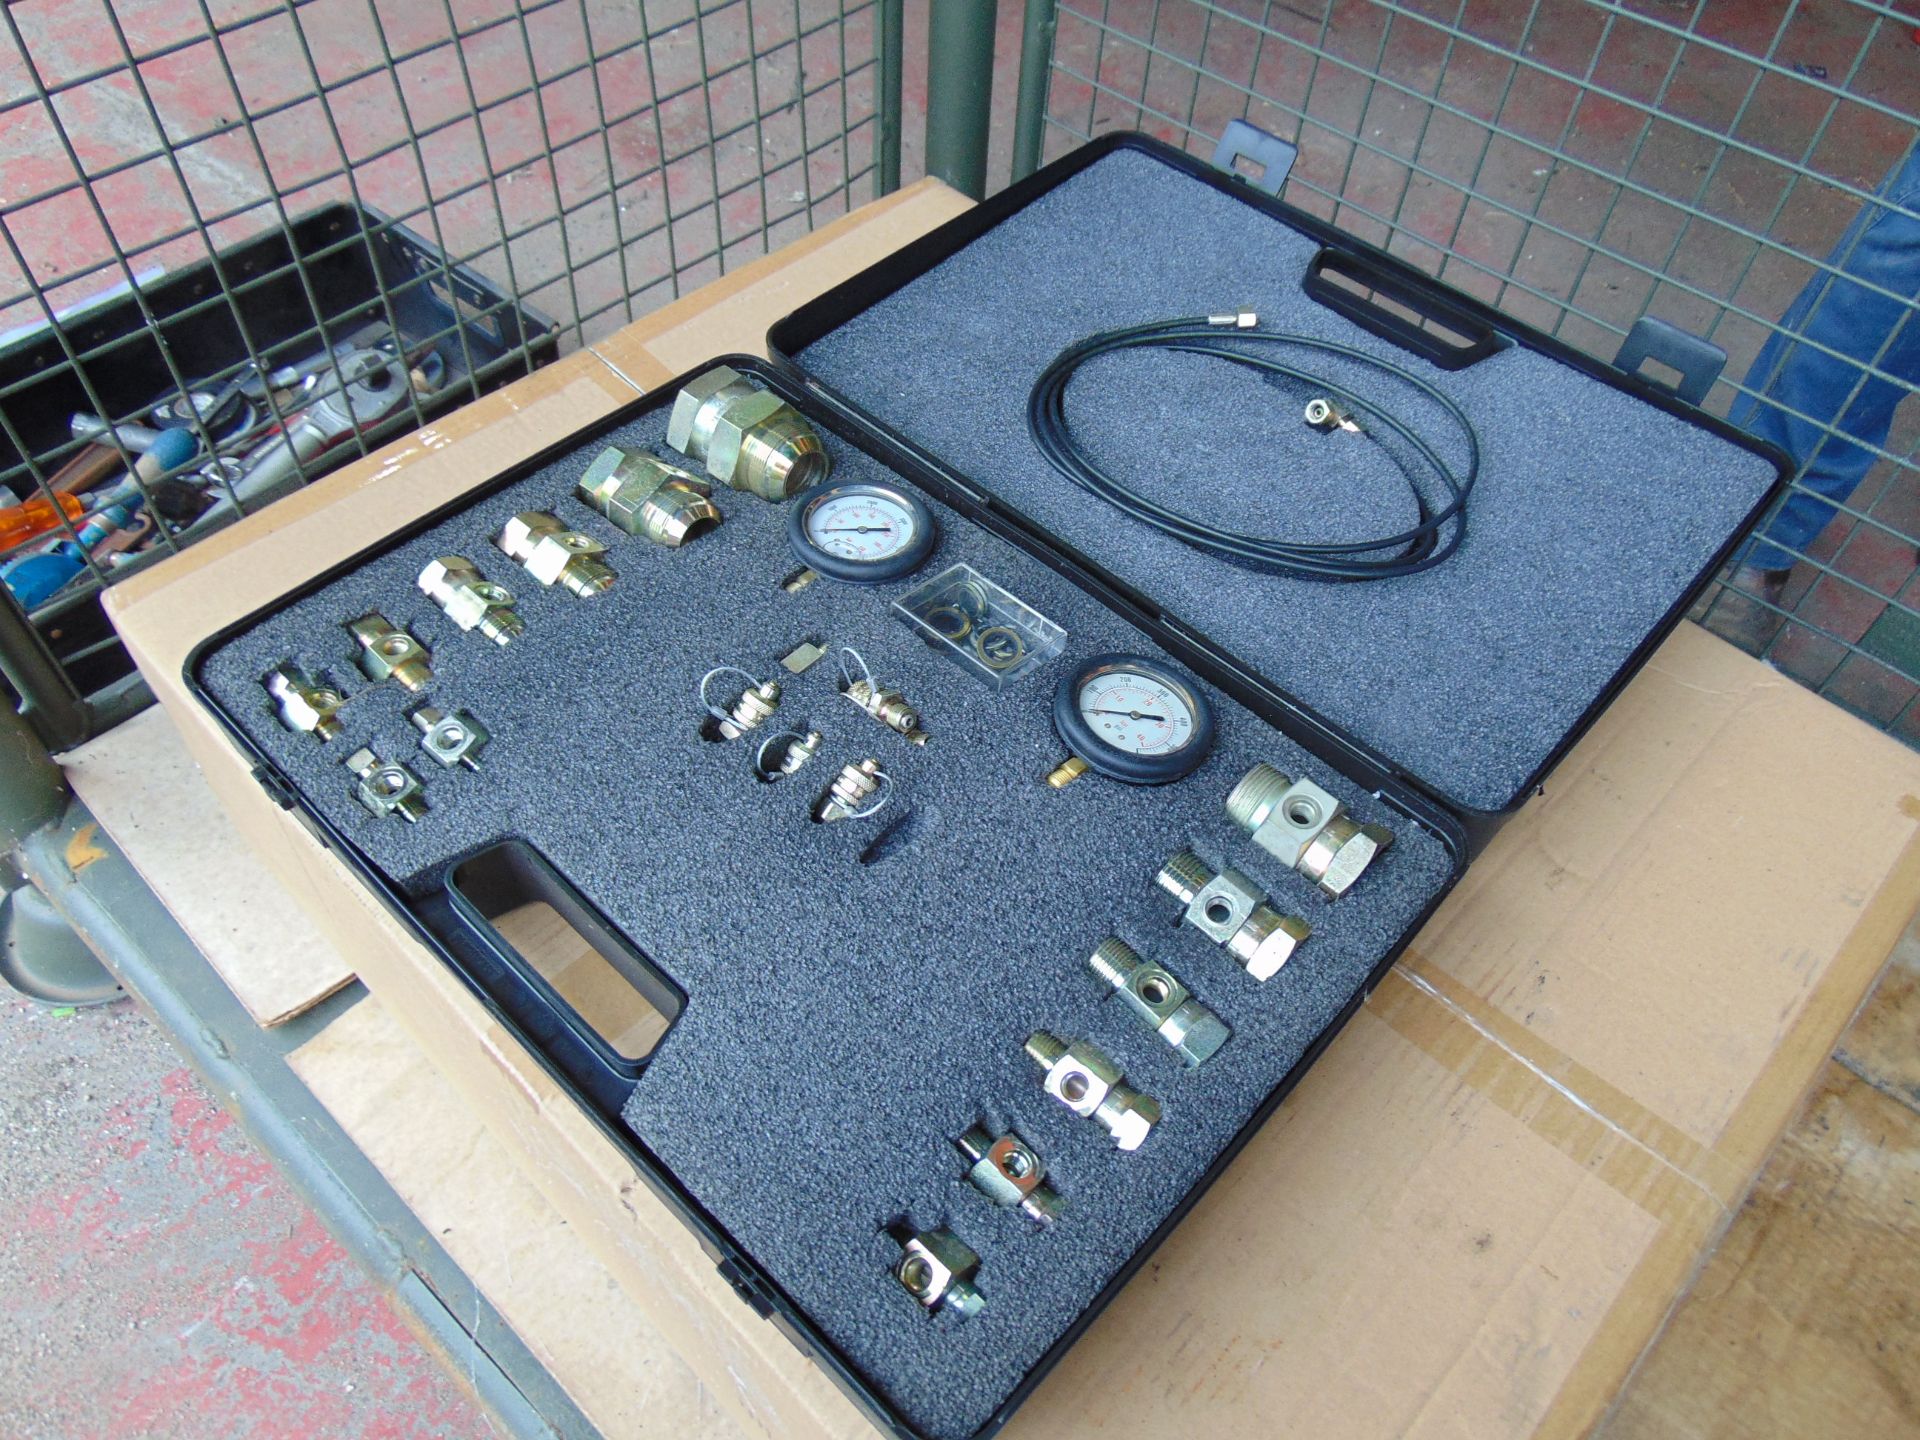 New Unissued Hydraulic Testing Kit From the MoD in Transit Case - Image 5 of 6